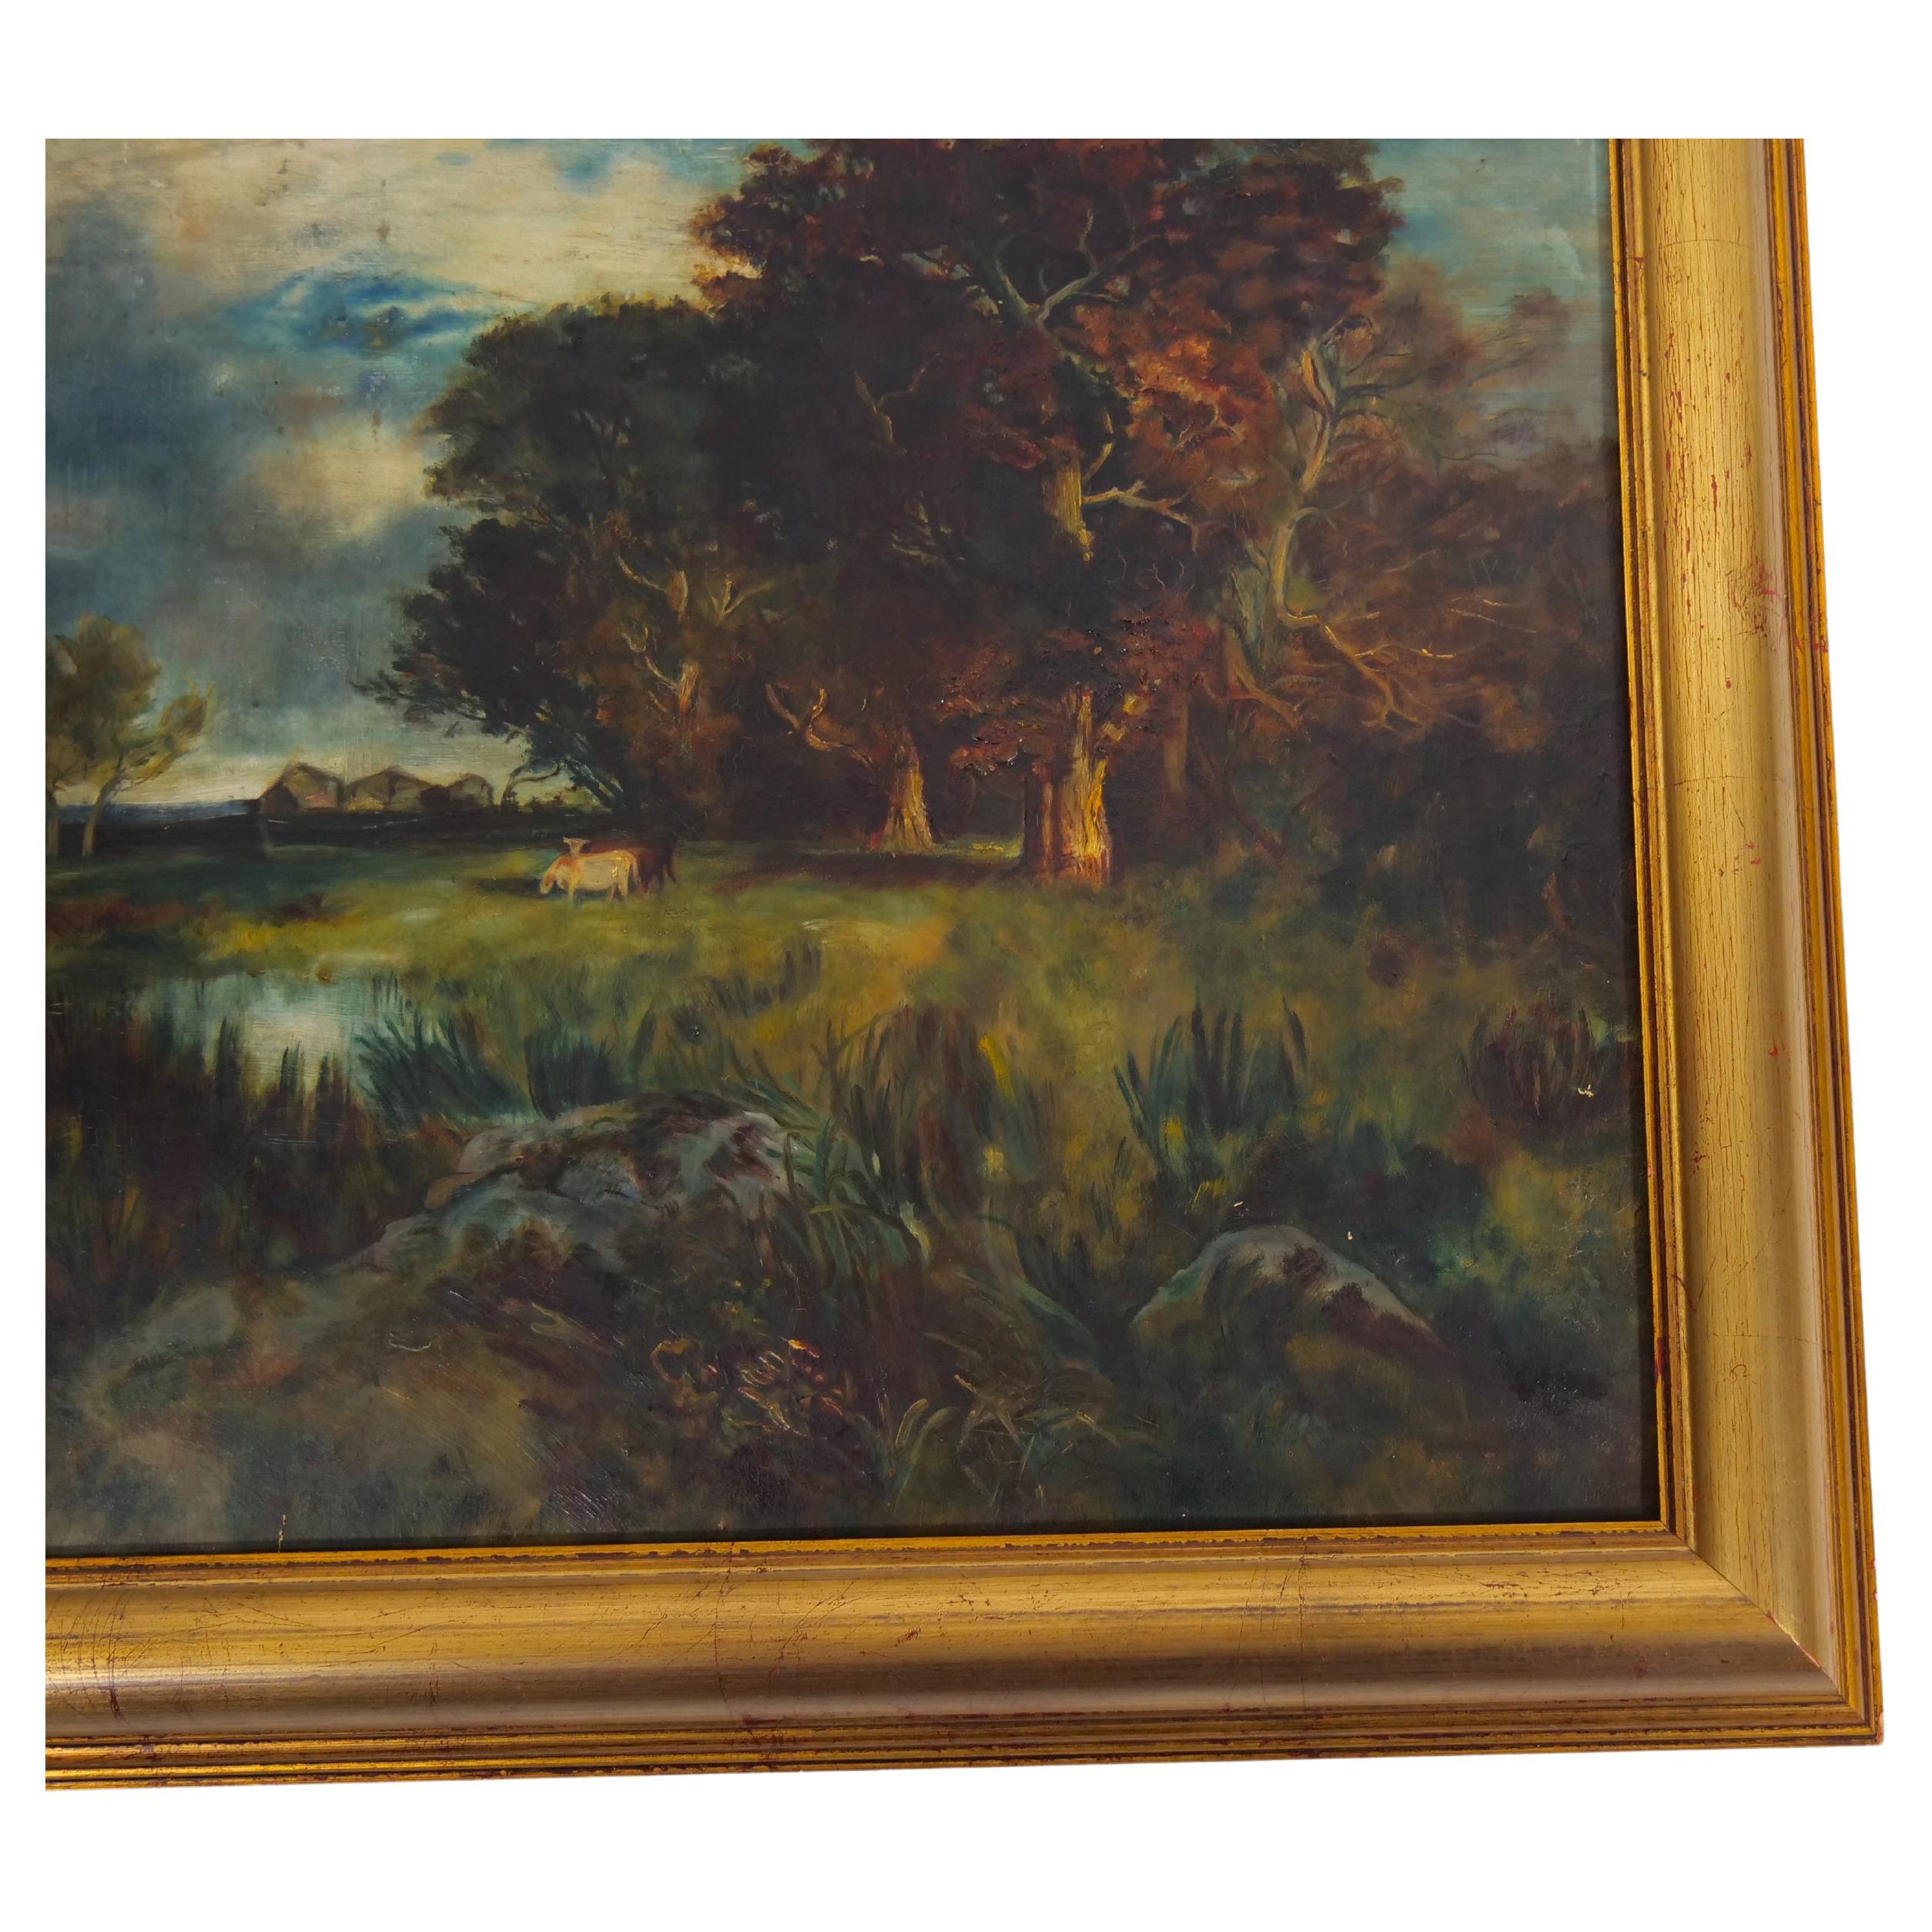 Early 20th century wood framed oil on board decorative hanging wall painting. The painting is in good condition. Minor wear consistent with age / use. Artist signature on the lower left hand corner. The frame measures 22 1/5 inches high x 29 inches